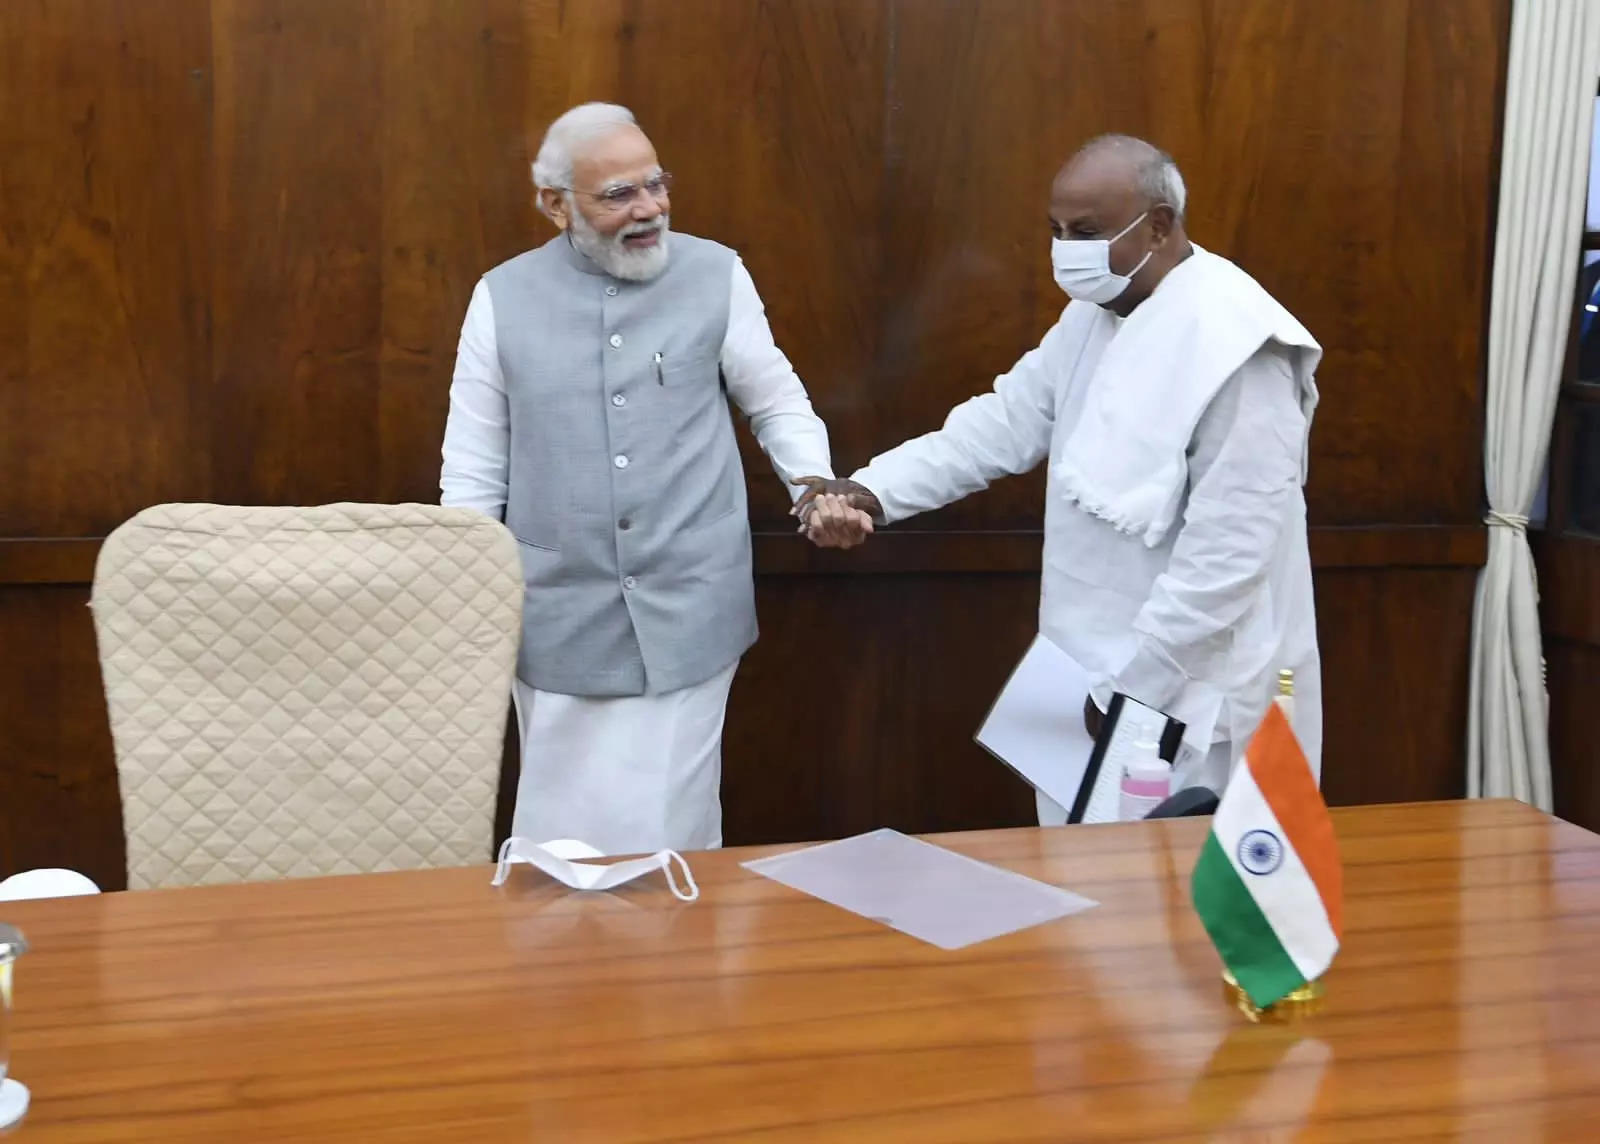 Photos of PM Modi with ex-PM H D Deve Gowda | The Times of India